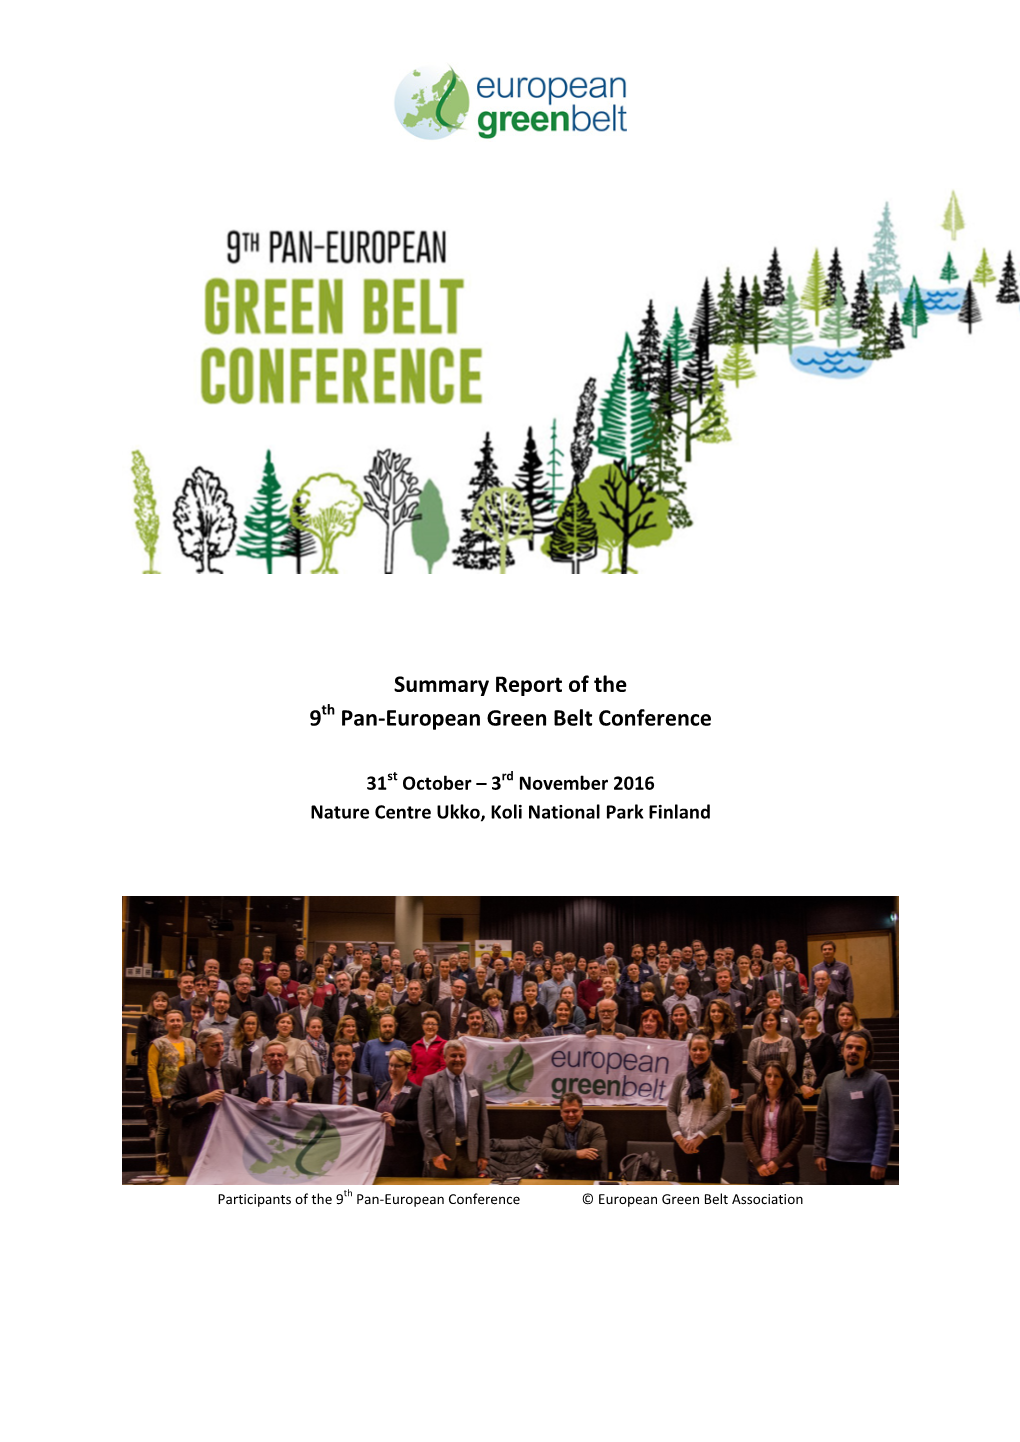 Summary Report of the 9Th Pan-European Green Belt Conference